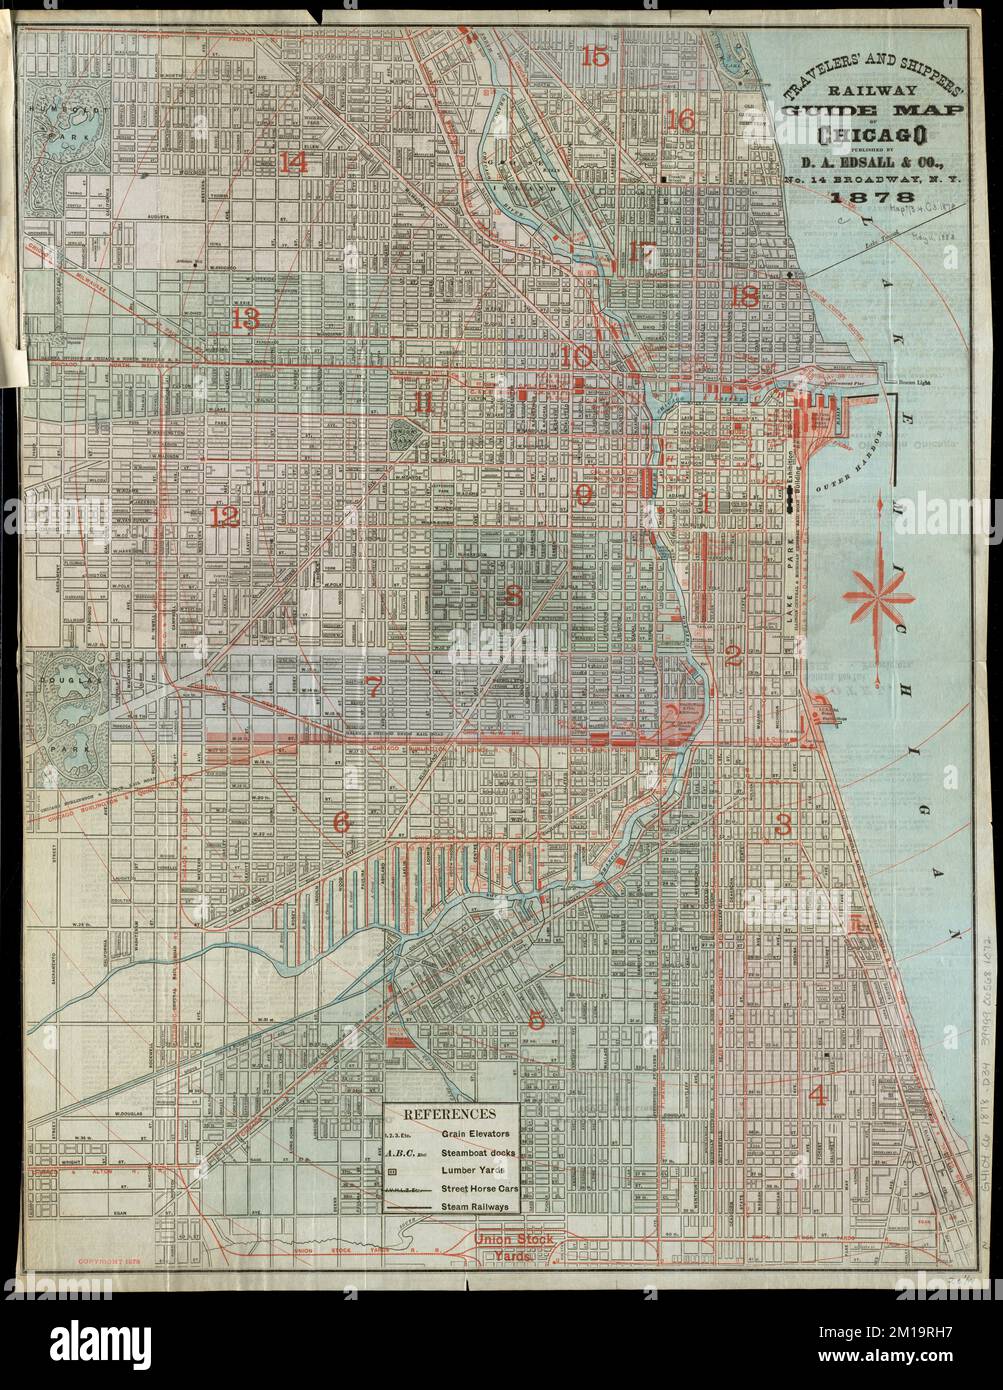 Travelers' and shippers' railway guide map of Chicago , Chicago Ill., Maps Norman B. Leventhal Map Center Collection Stock Photo